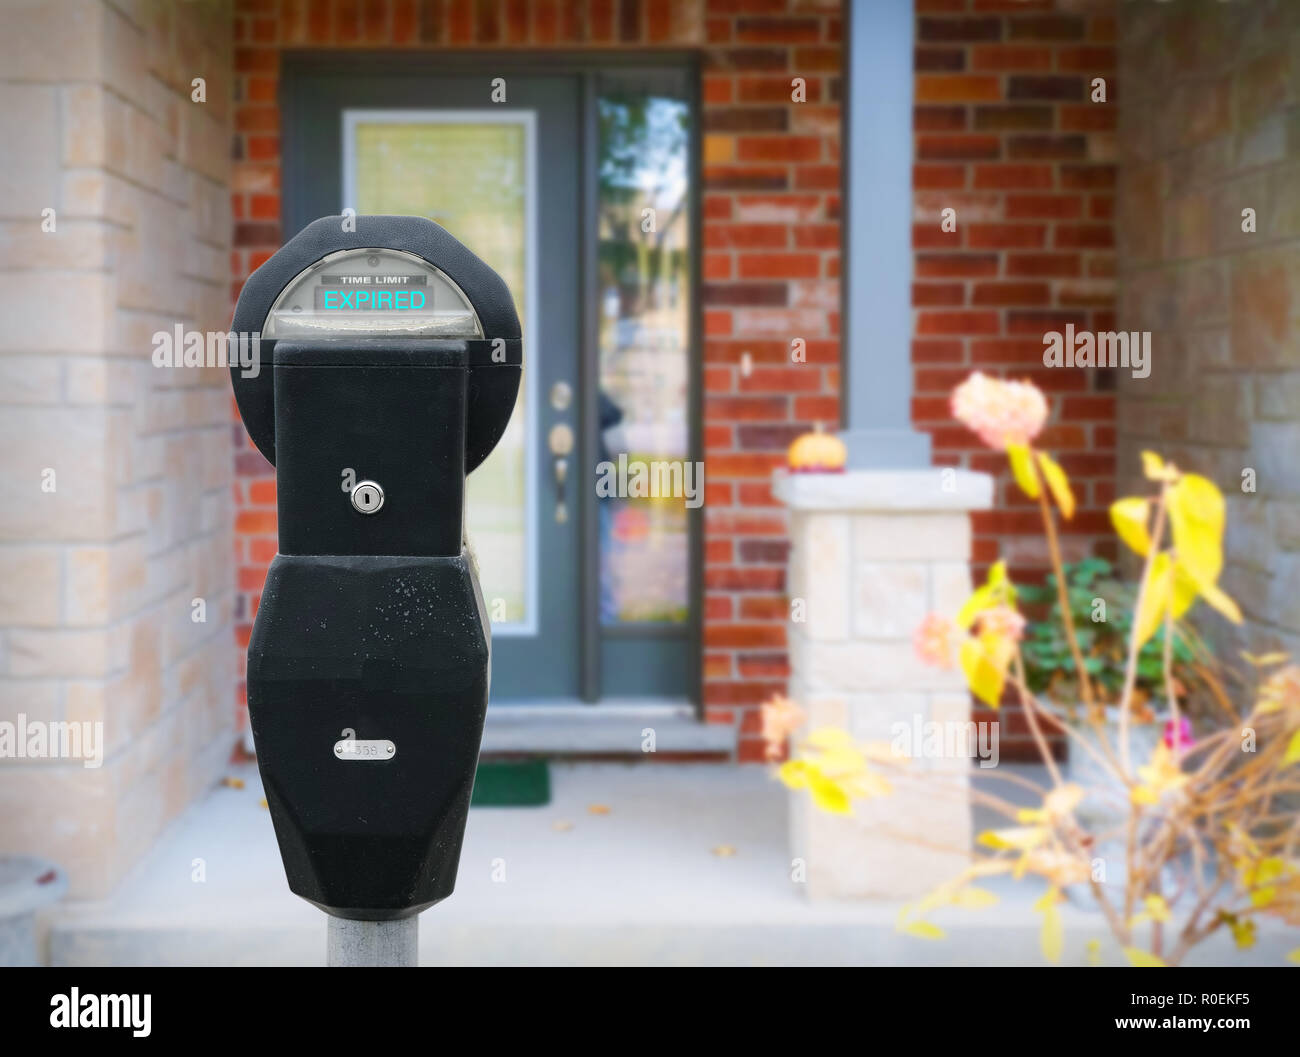 In front of the entrance of the house there is a parking meter. This image is related to the cost of living in your home. Stock Photo